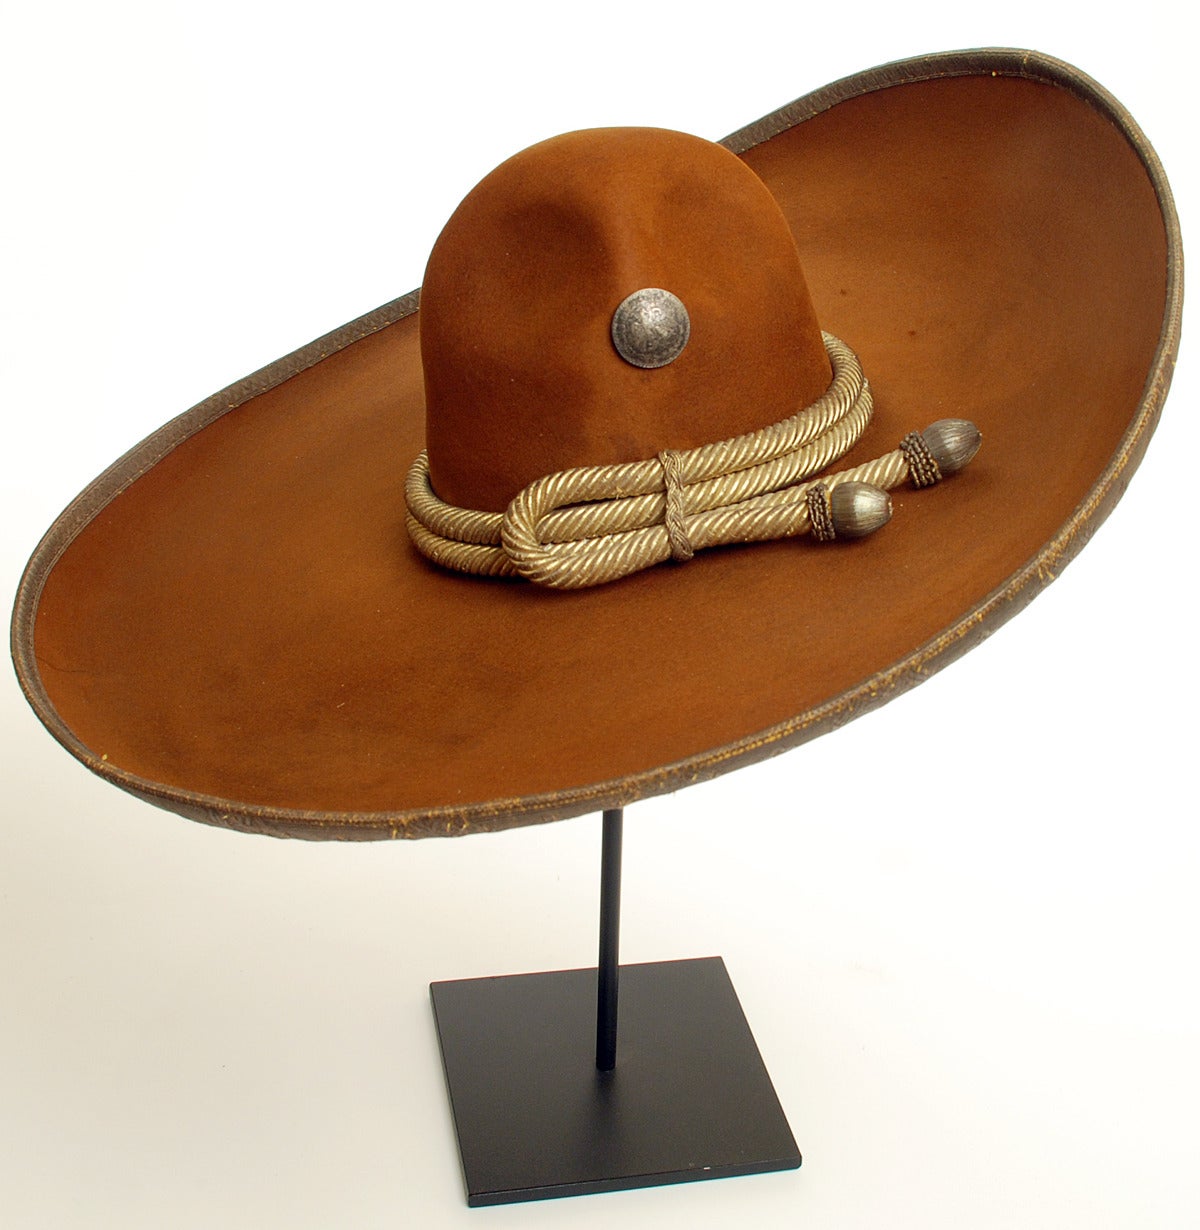 Antique Sombrero - For Sale on 1stDibs